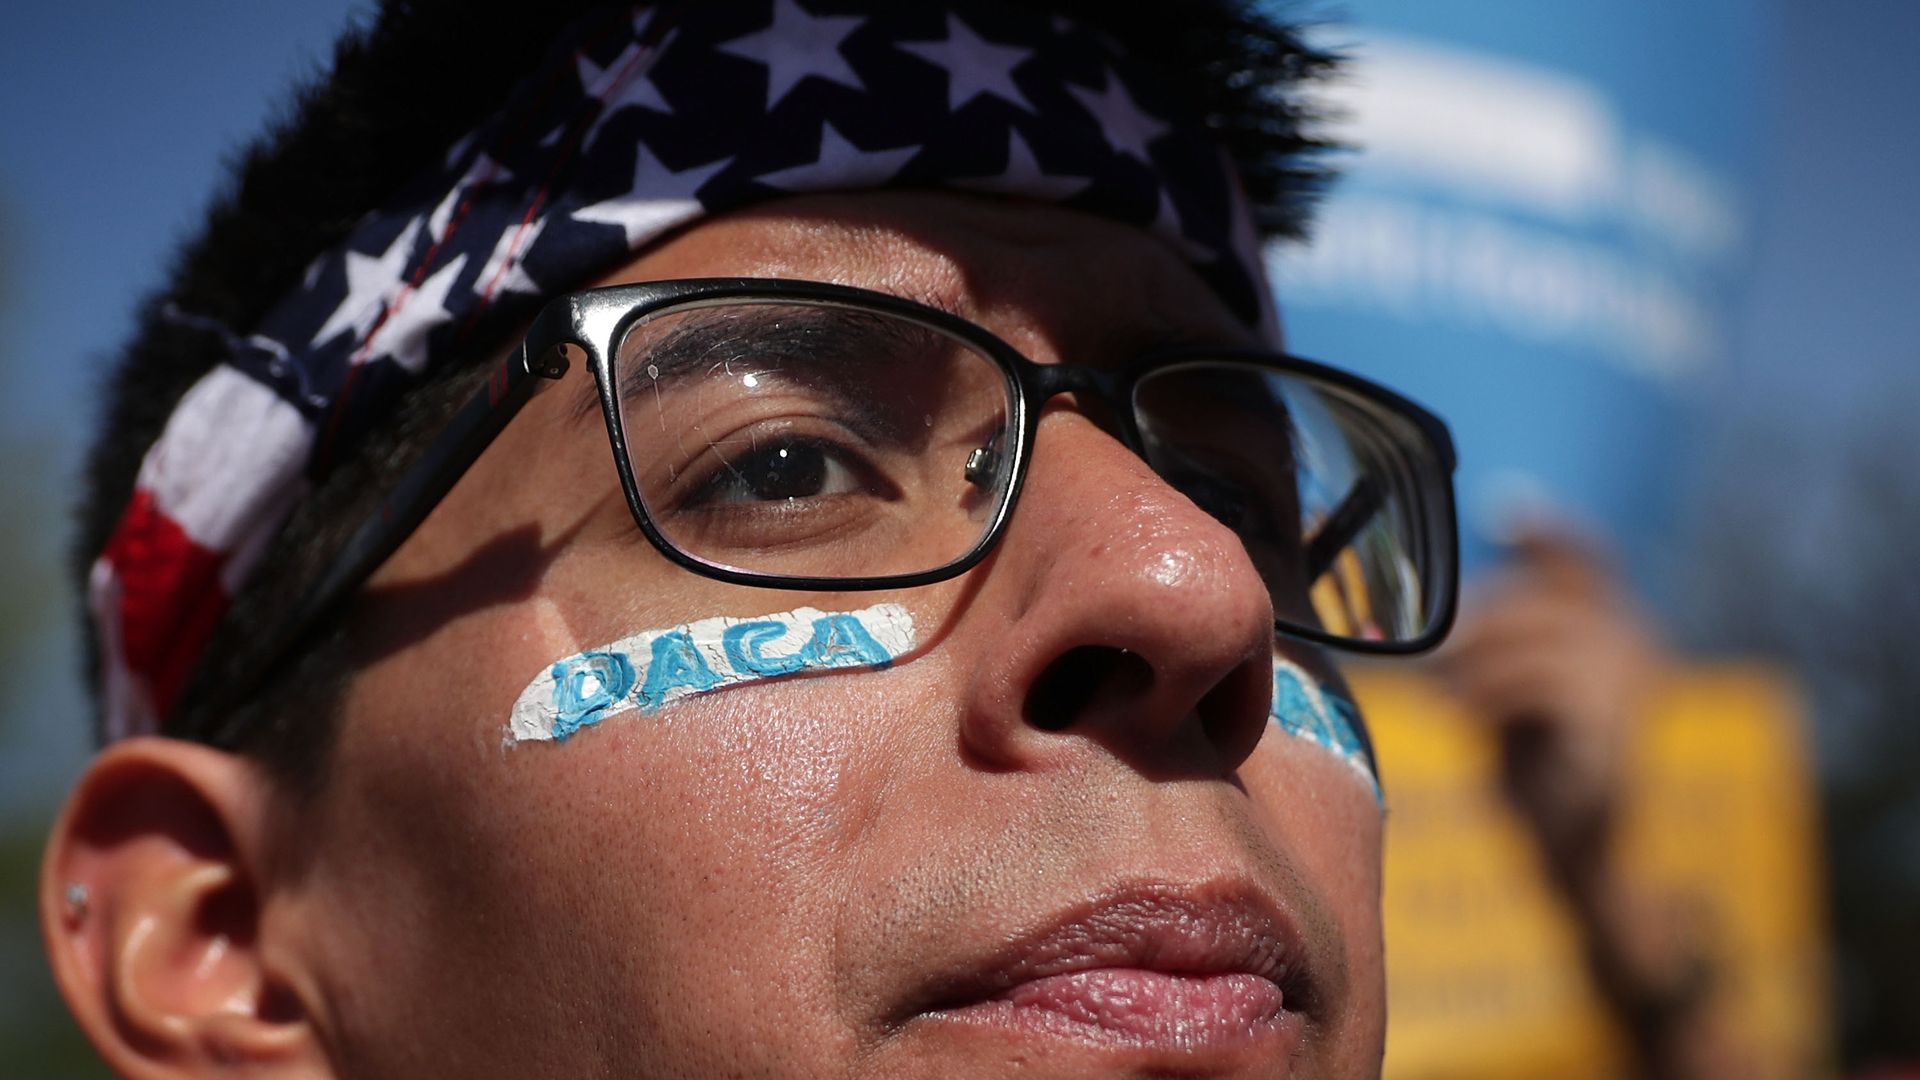 DACA protestor with glasses, American flag bandana and stickers under his eyes with "DACA" written on them